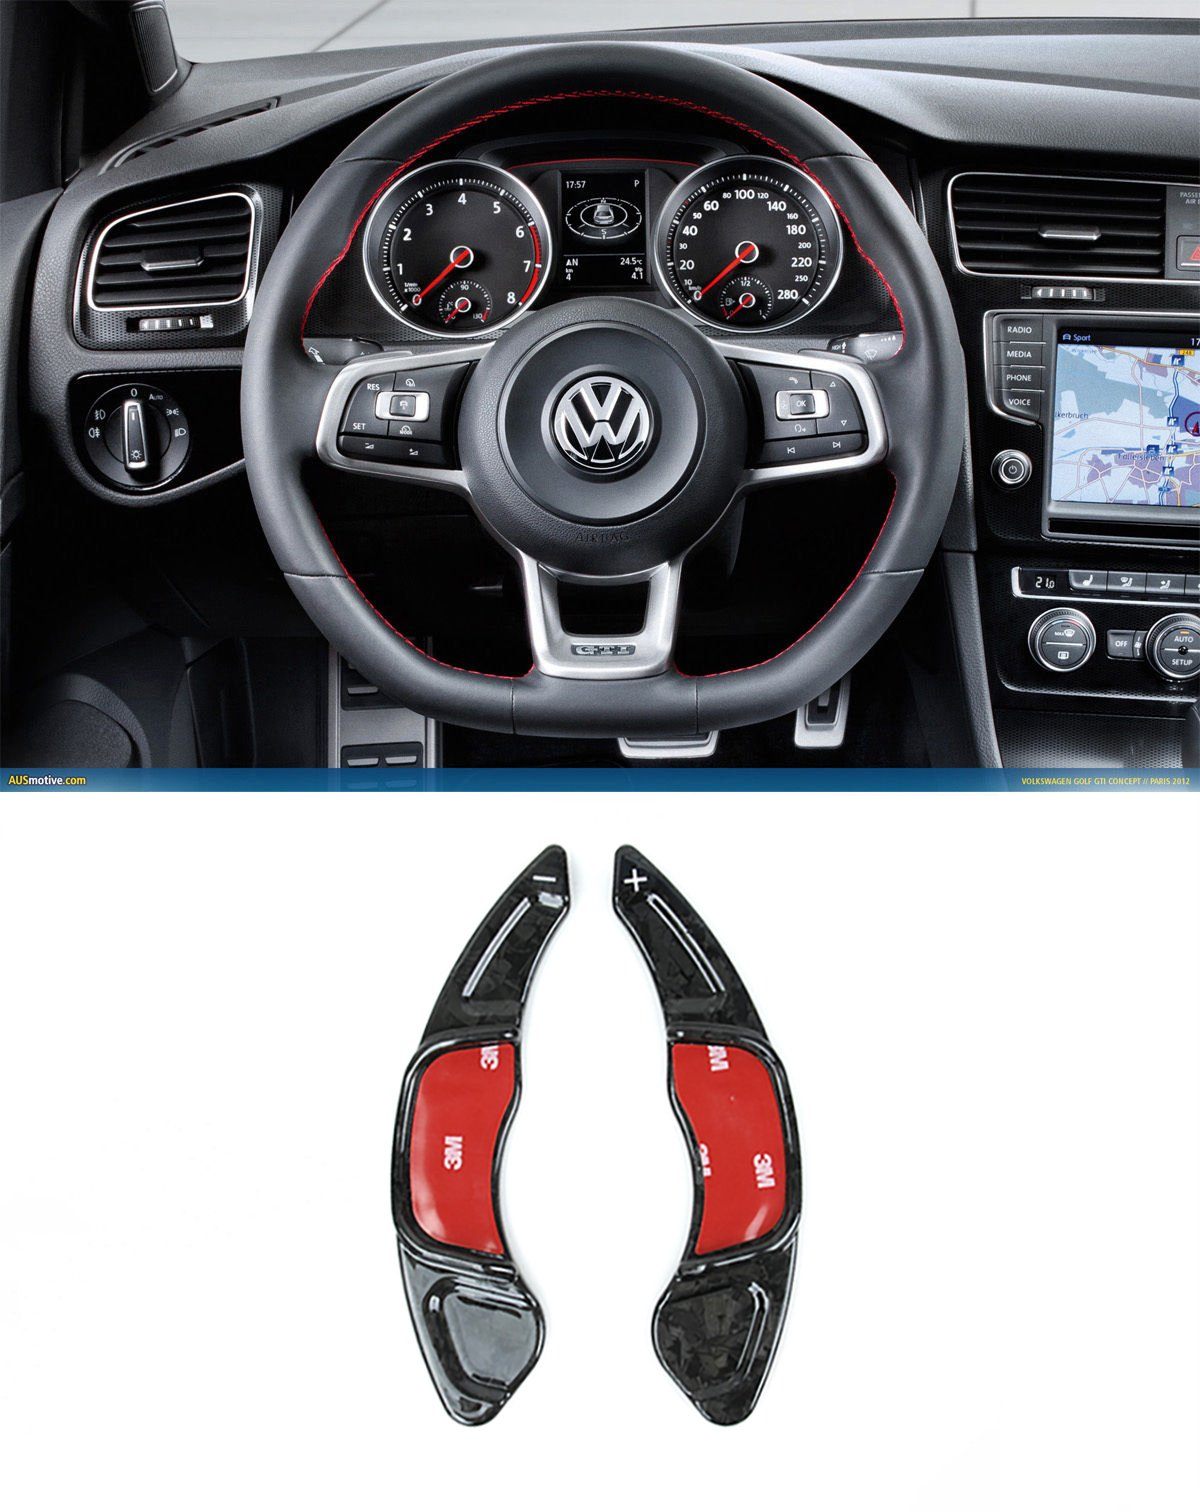 Forged Carbon Fiber DSG Paddle Shifter Extensions for VW Golf MK7 GTI R (Clan Carbon)